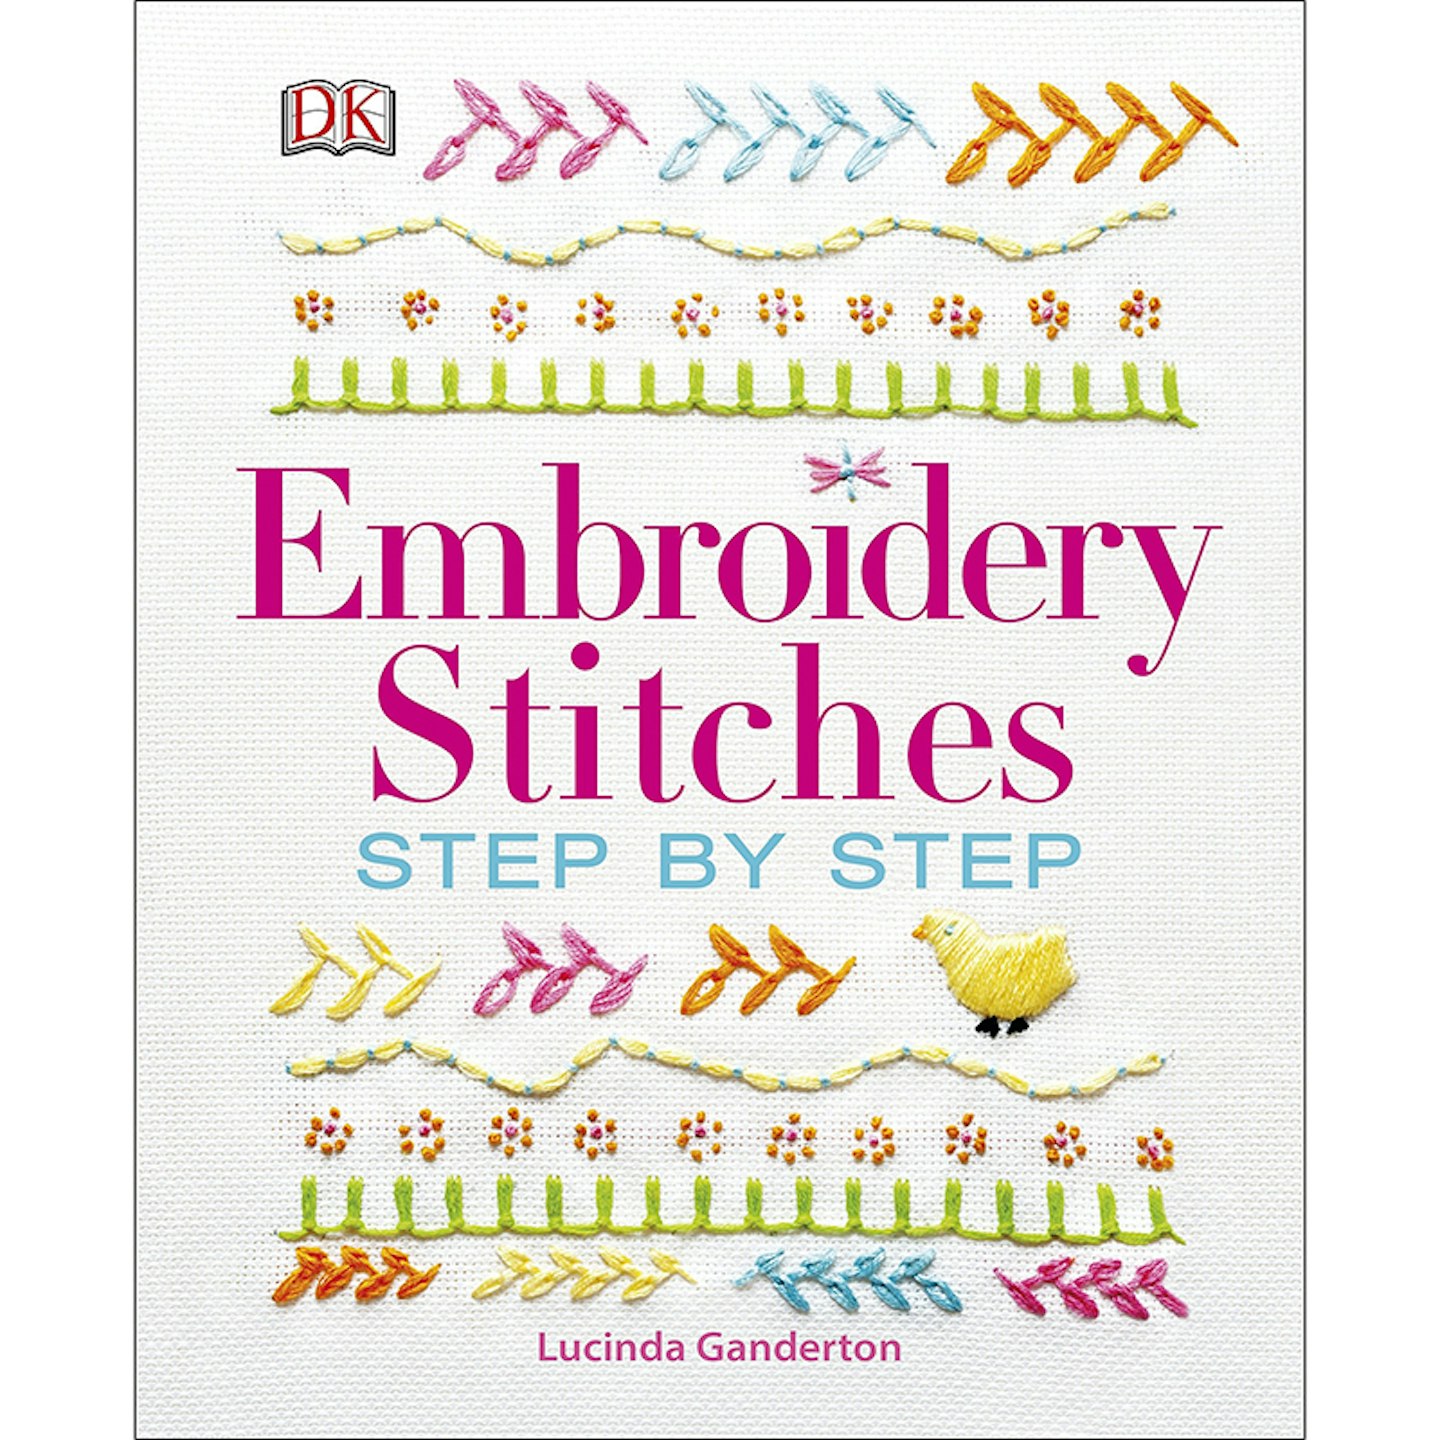 Embroidery Stitches Step-by-Step by Lucinda Ganderton